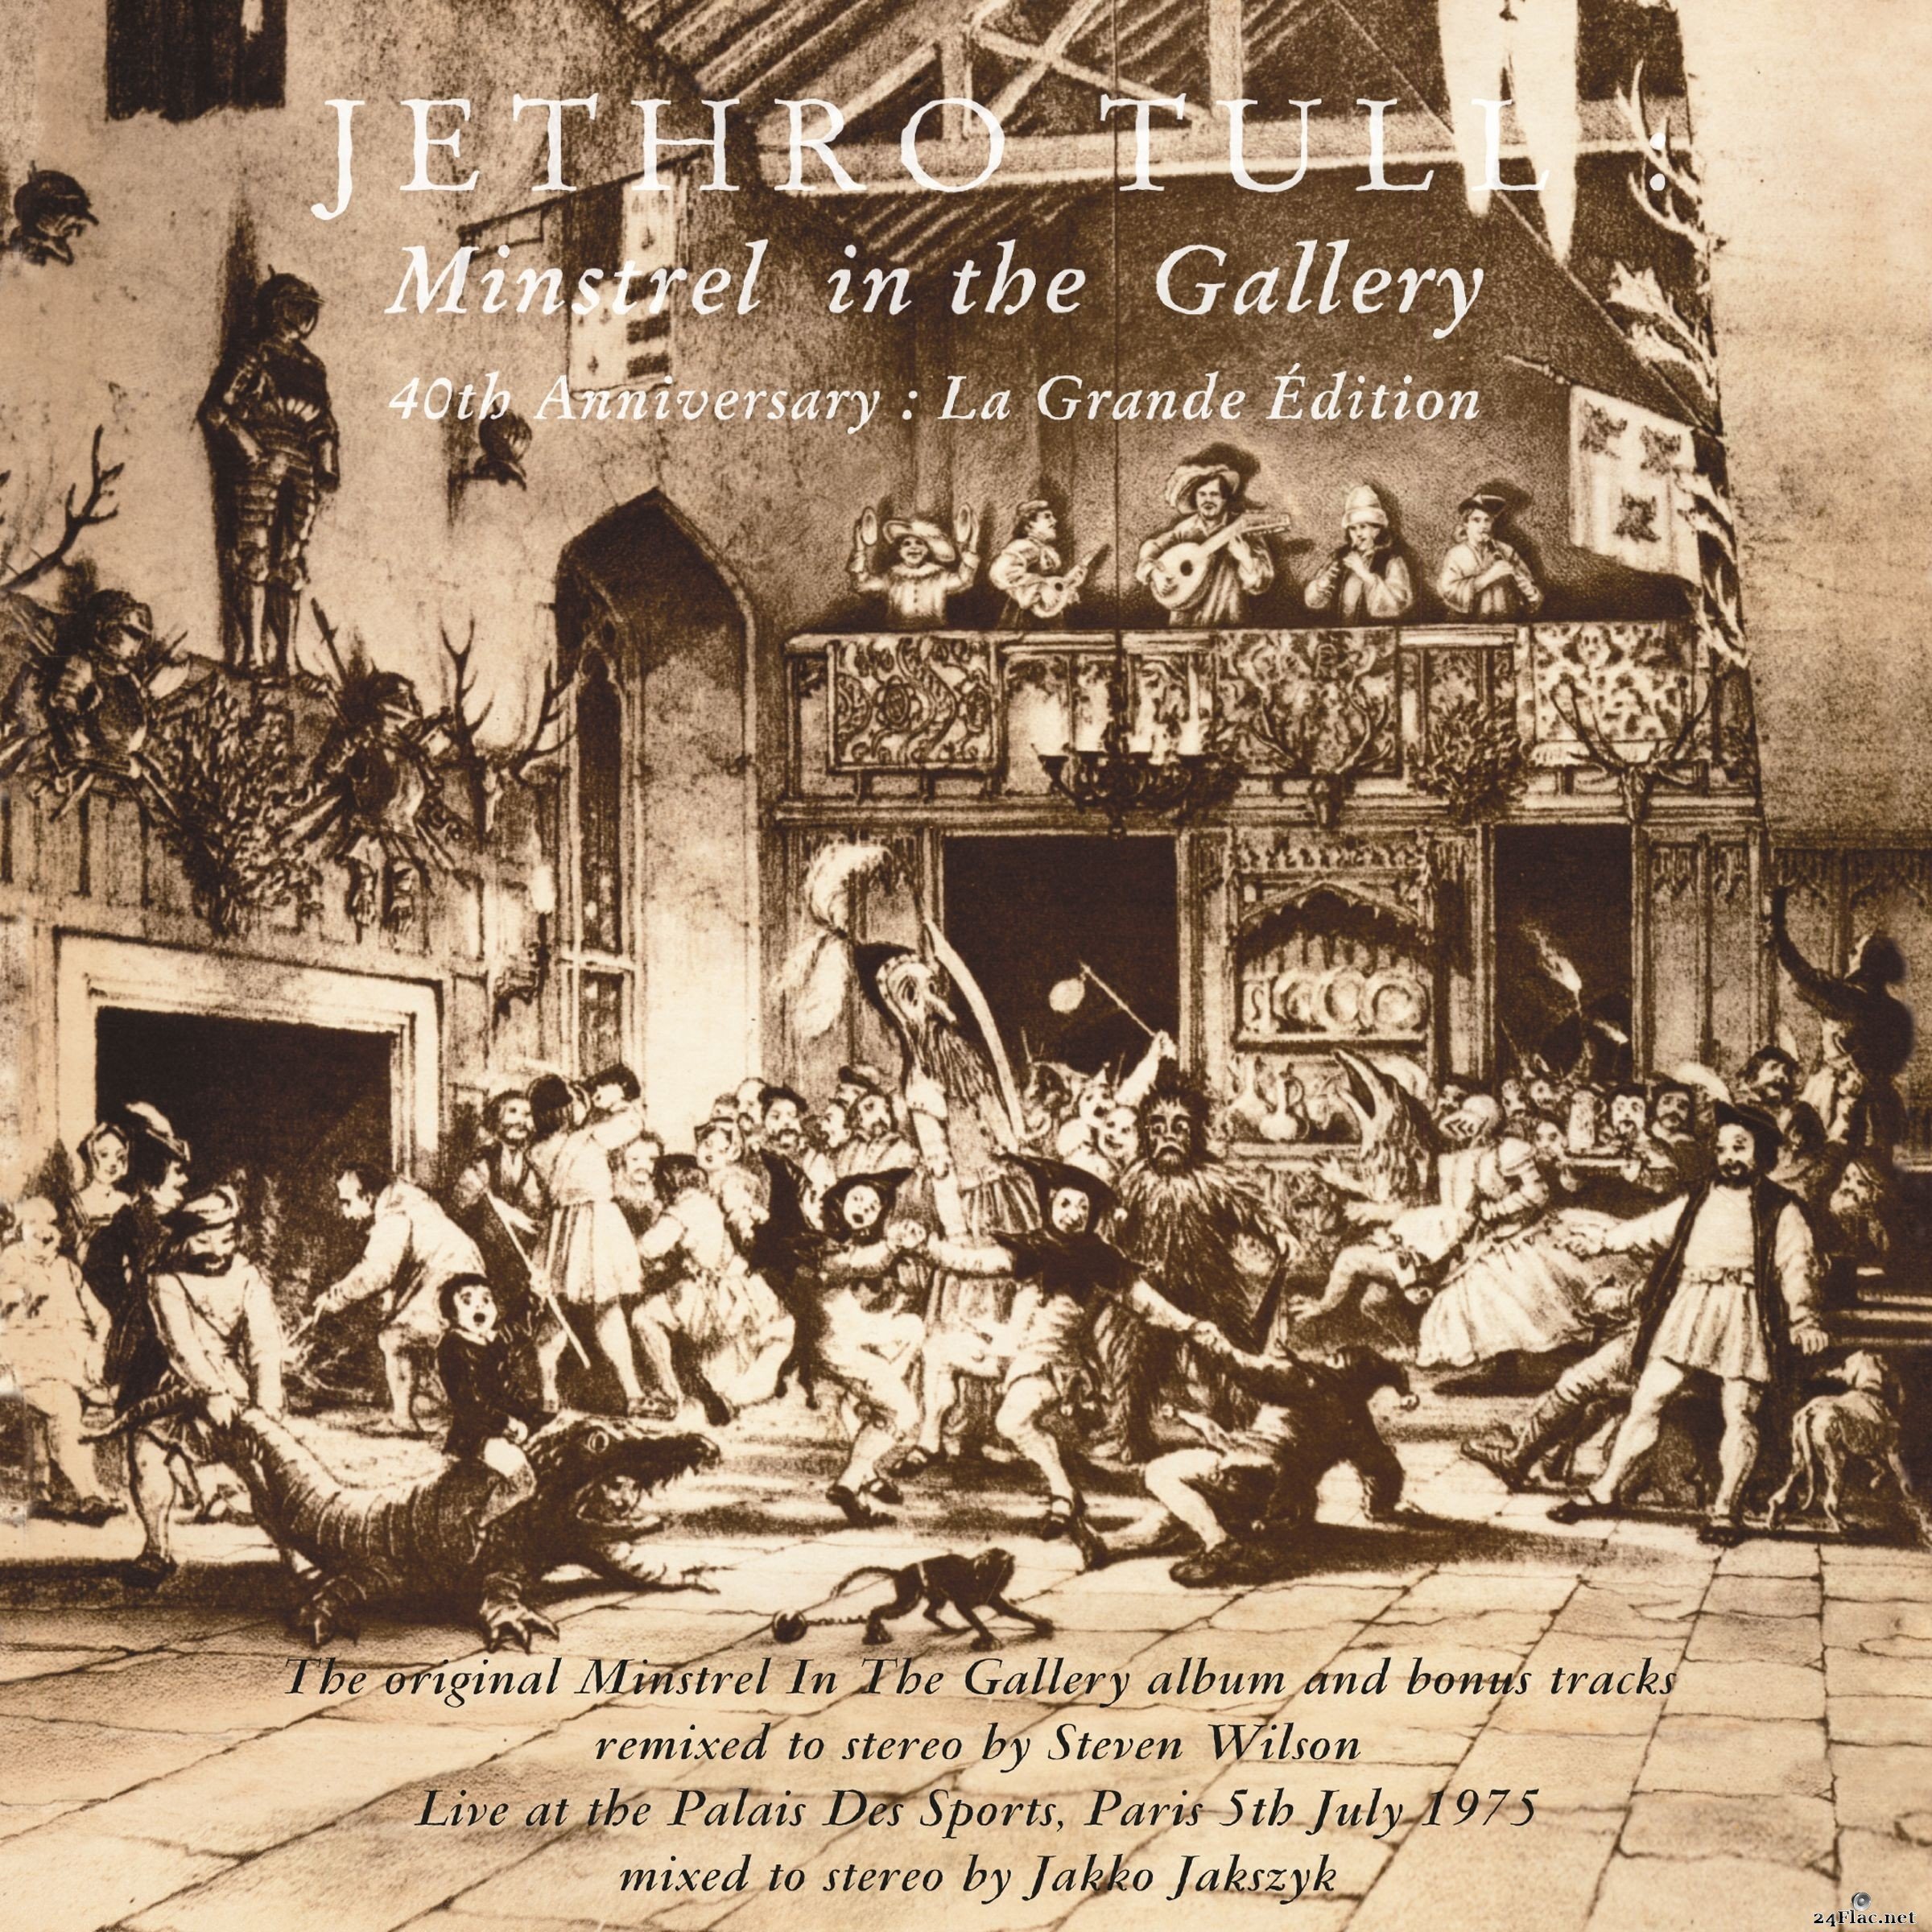 Jethro Tull - Minstrel in the Gallery (40th Anniversary Edition) (2015) FLAC